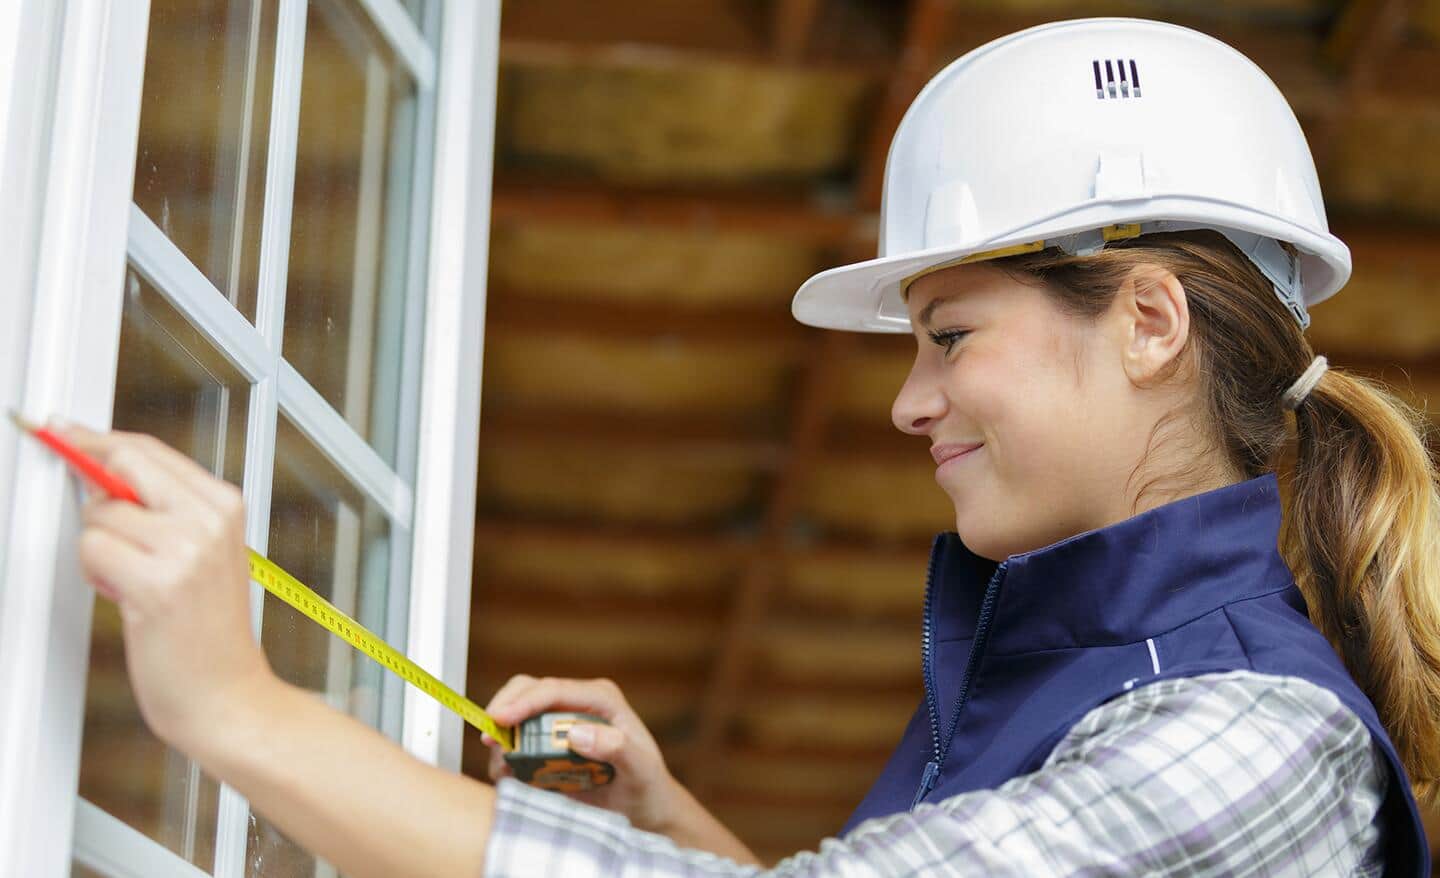 A woman wearing a hardhat measures a window with a tape measure.